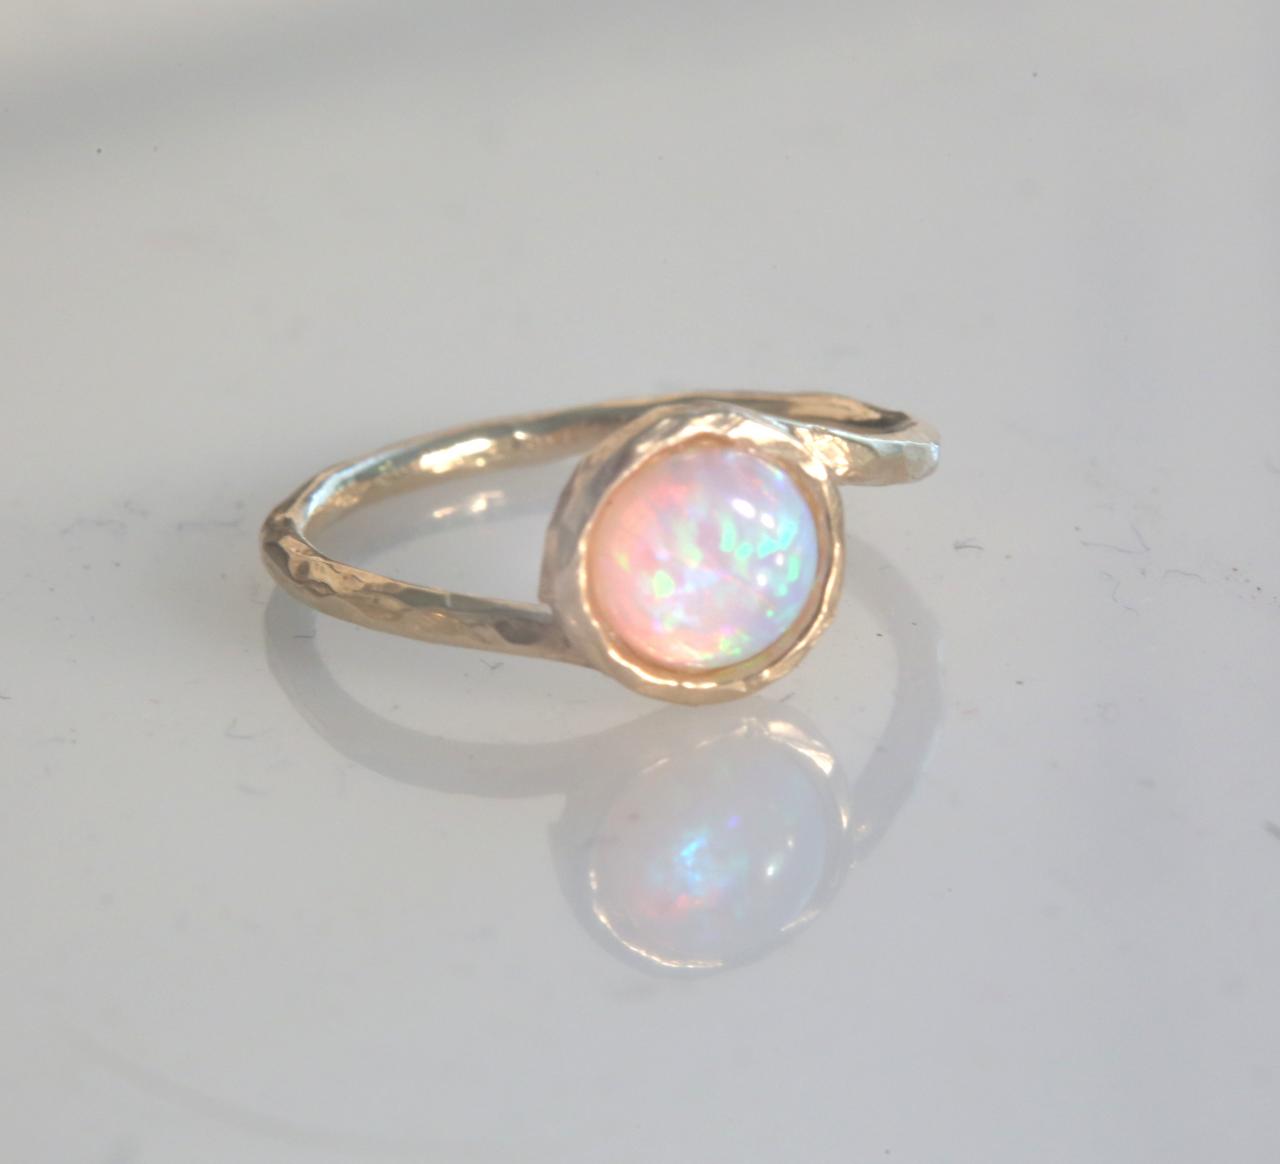 gold filled ring, gemstone ring, stacking ring, white opal ring, gold rings, opal, thin ring, hammered ring - t 13